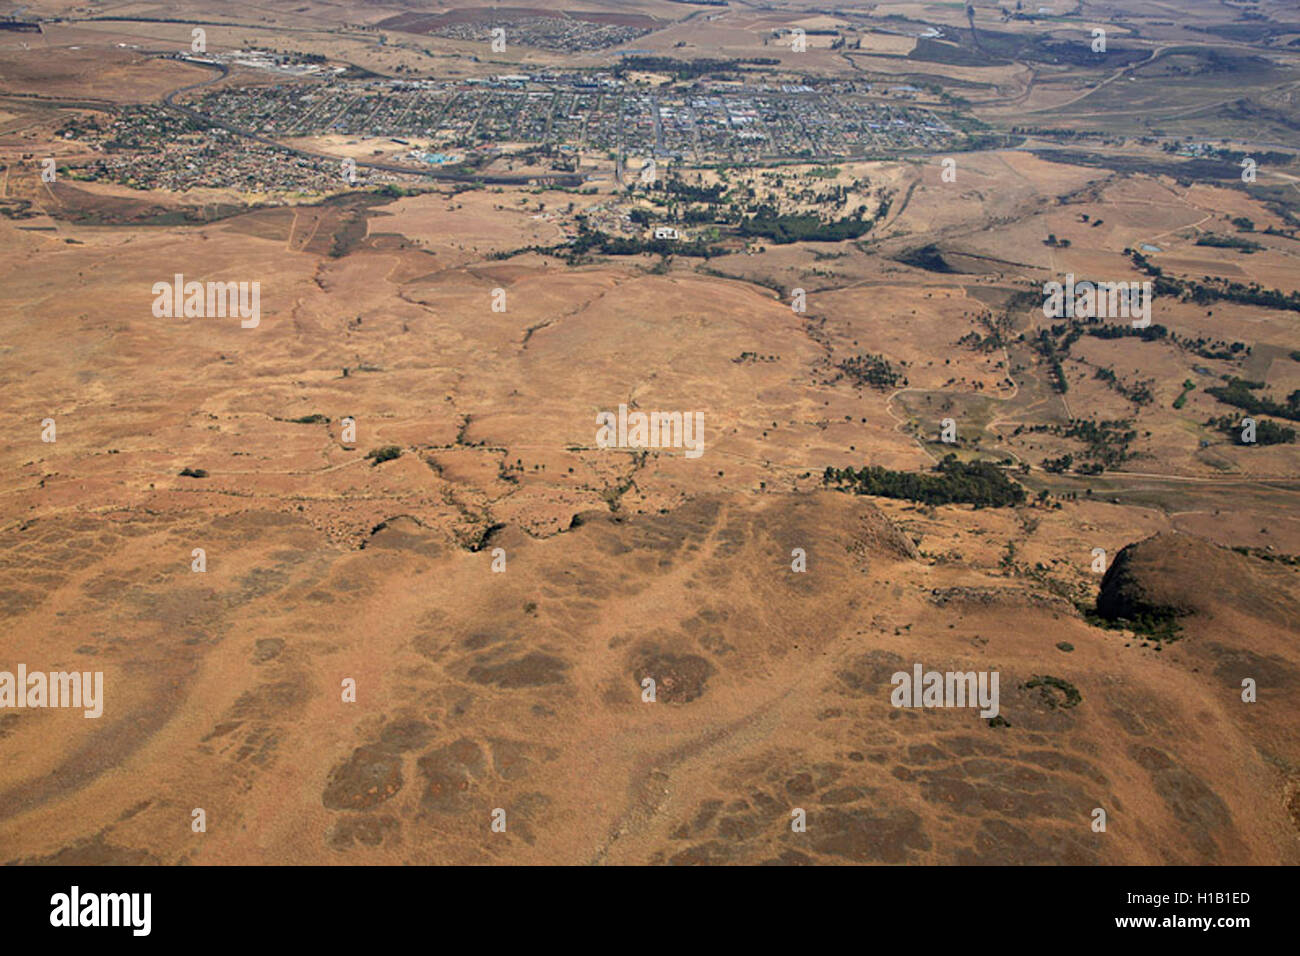 Aerial photograph of the foot of the Platberg mountain and the city of Harrismith in the background, Freestate, South Africa Stock Photo